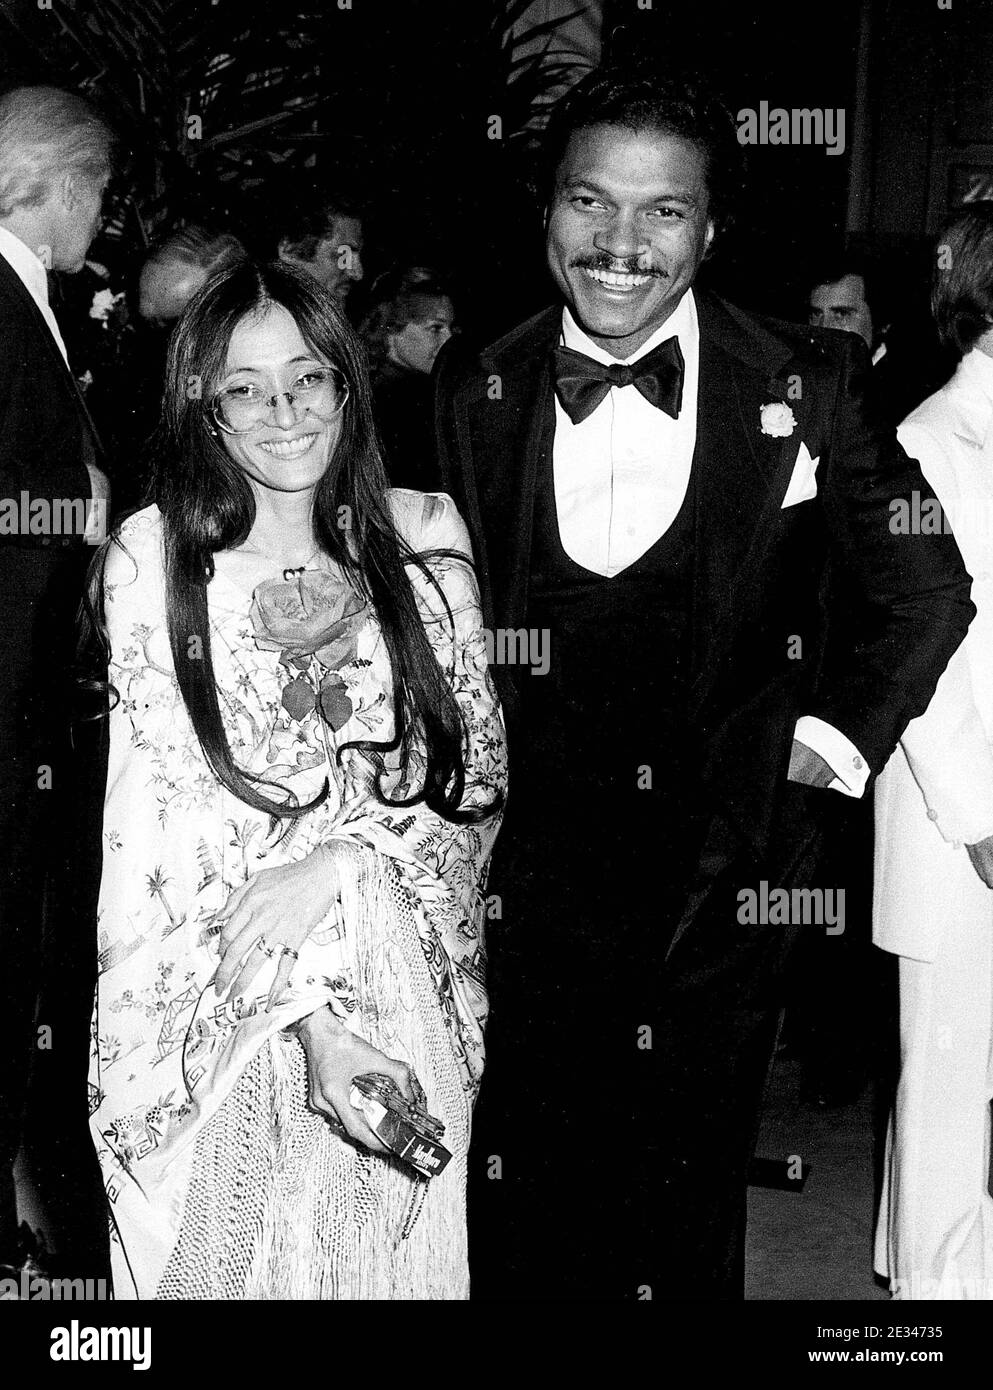 Billy Dee Williams With Wife Credit: Ralph Dominguez/MediaPunch